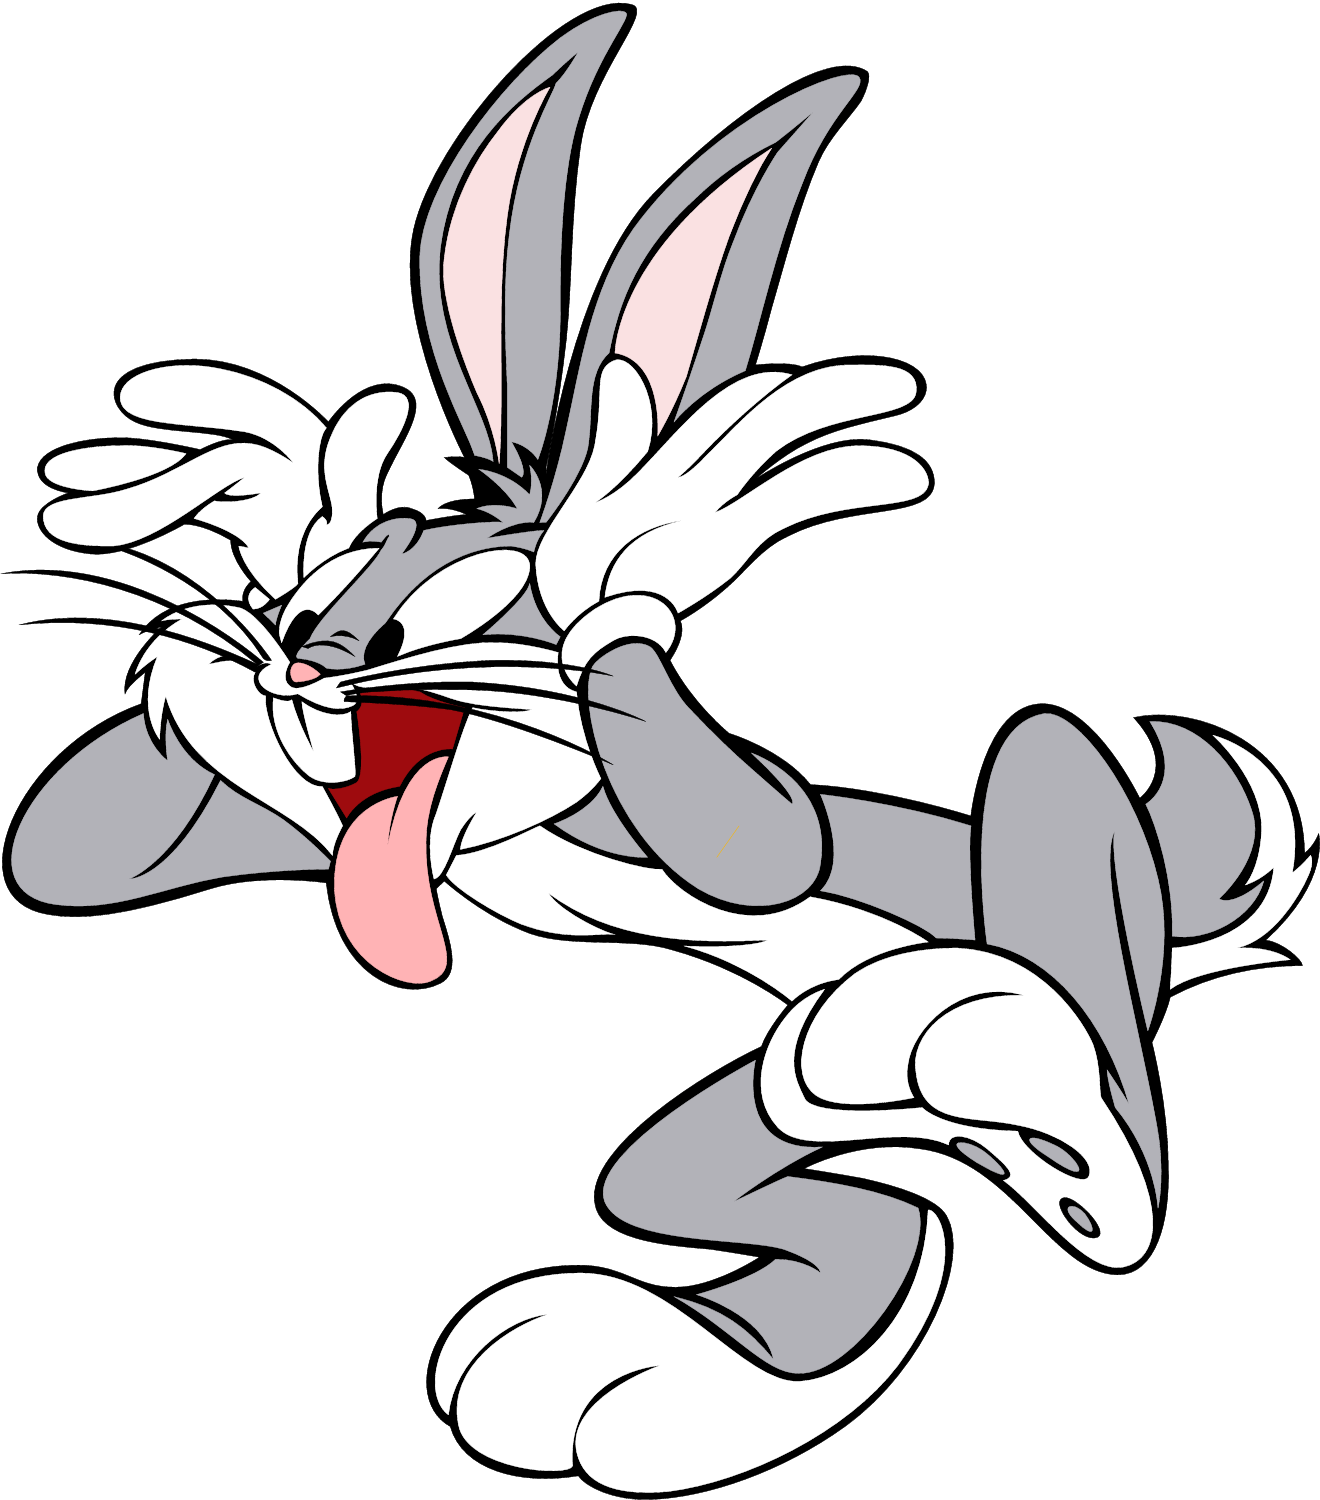 Face itoons pinterest and. Head clipart bugs bunny